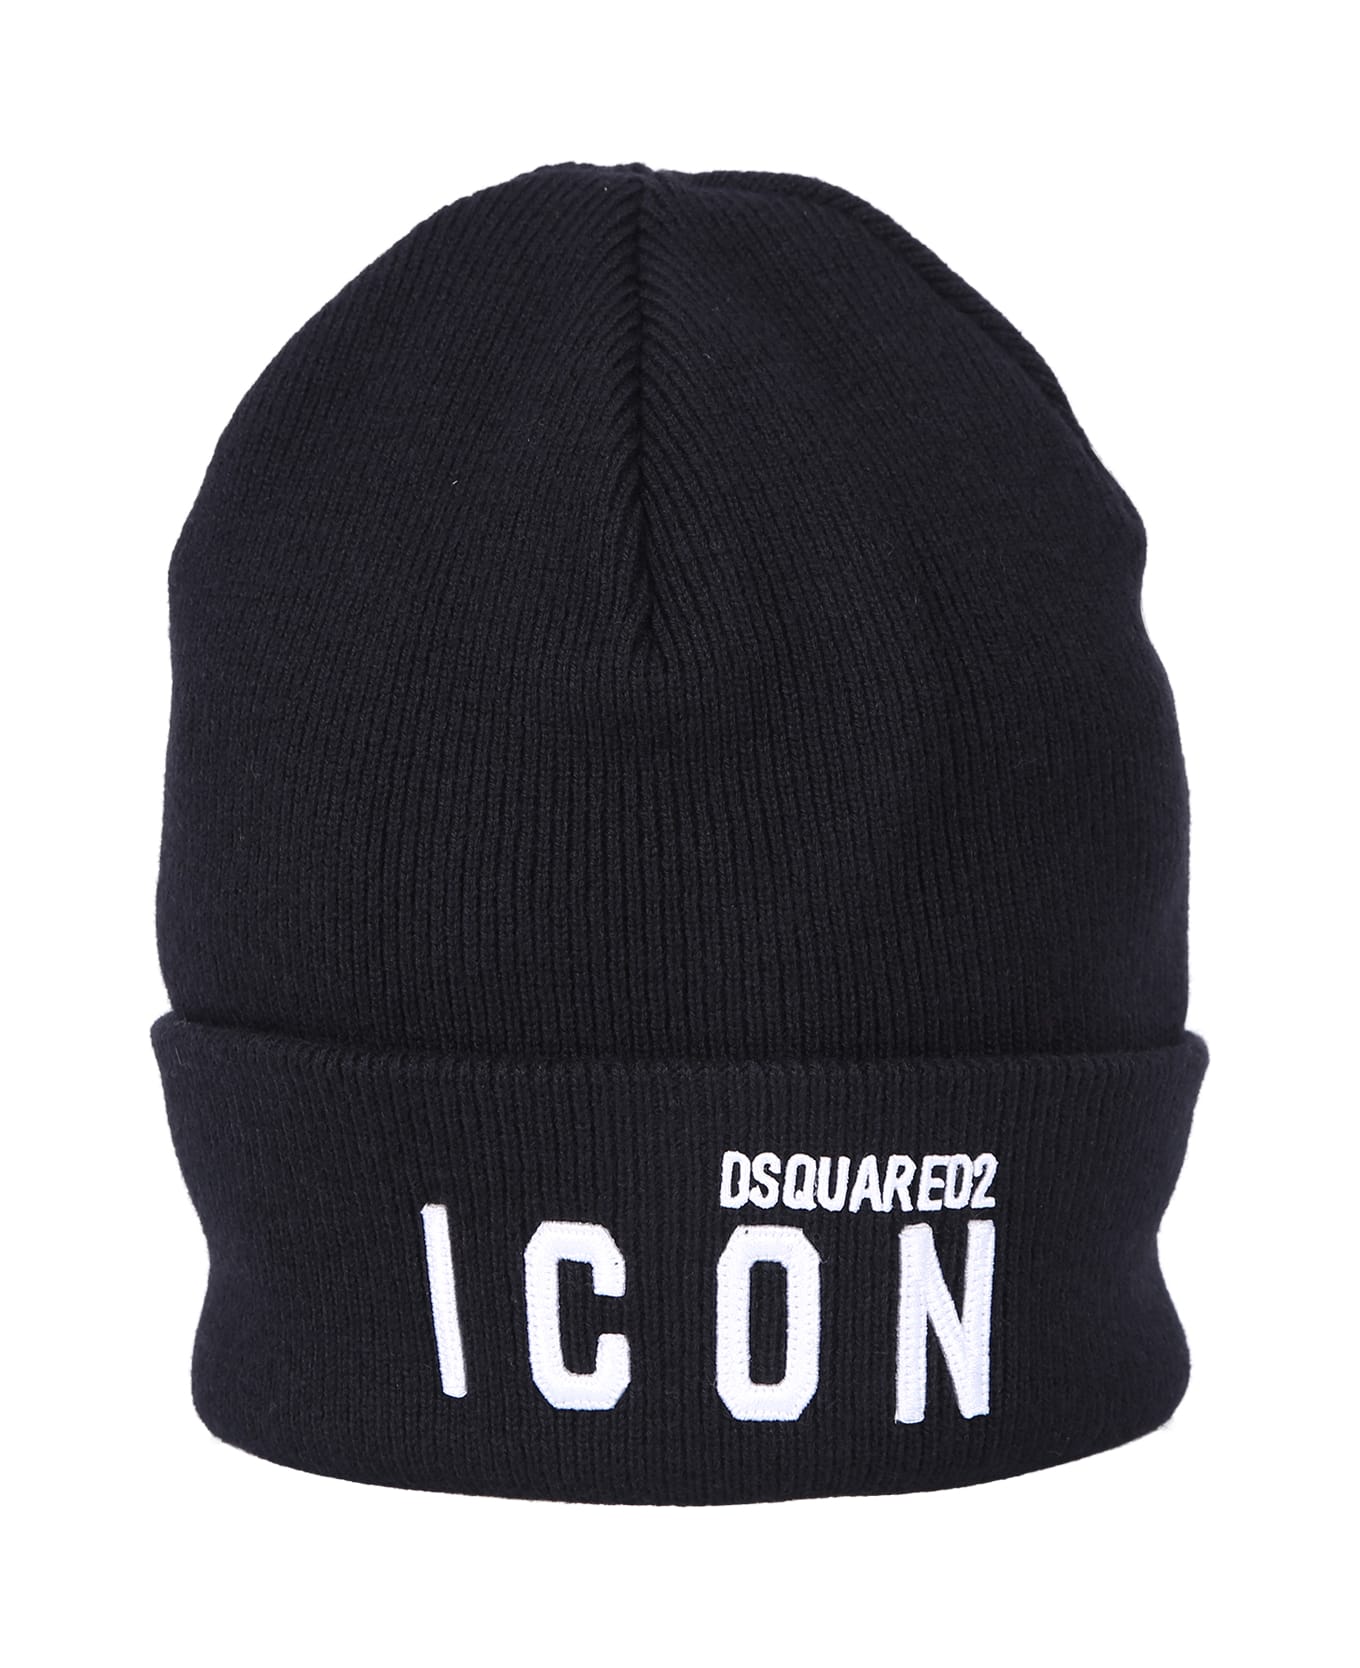 Dsquared2 Knitted Hat - Black